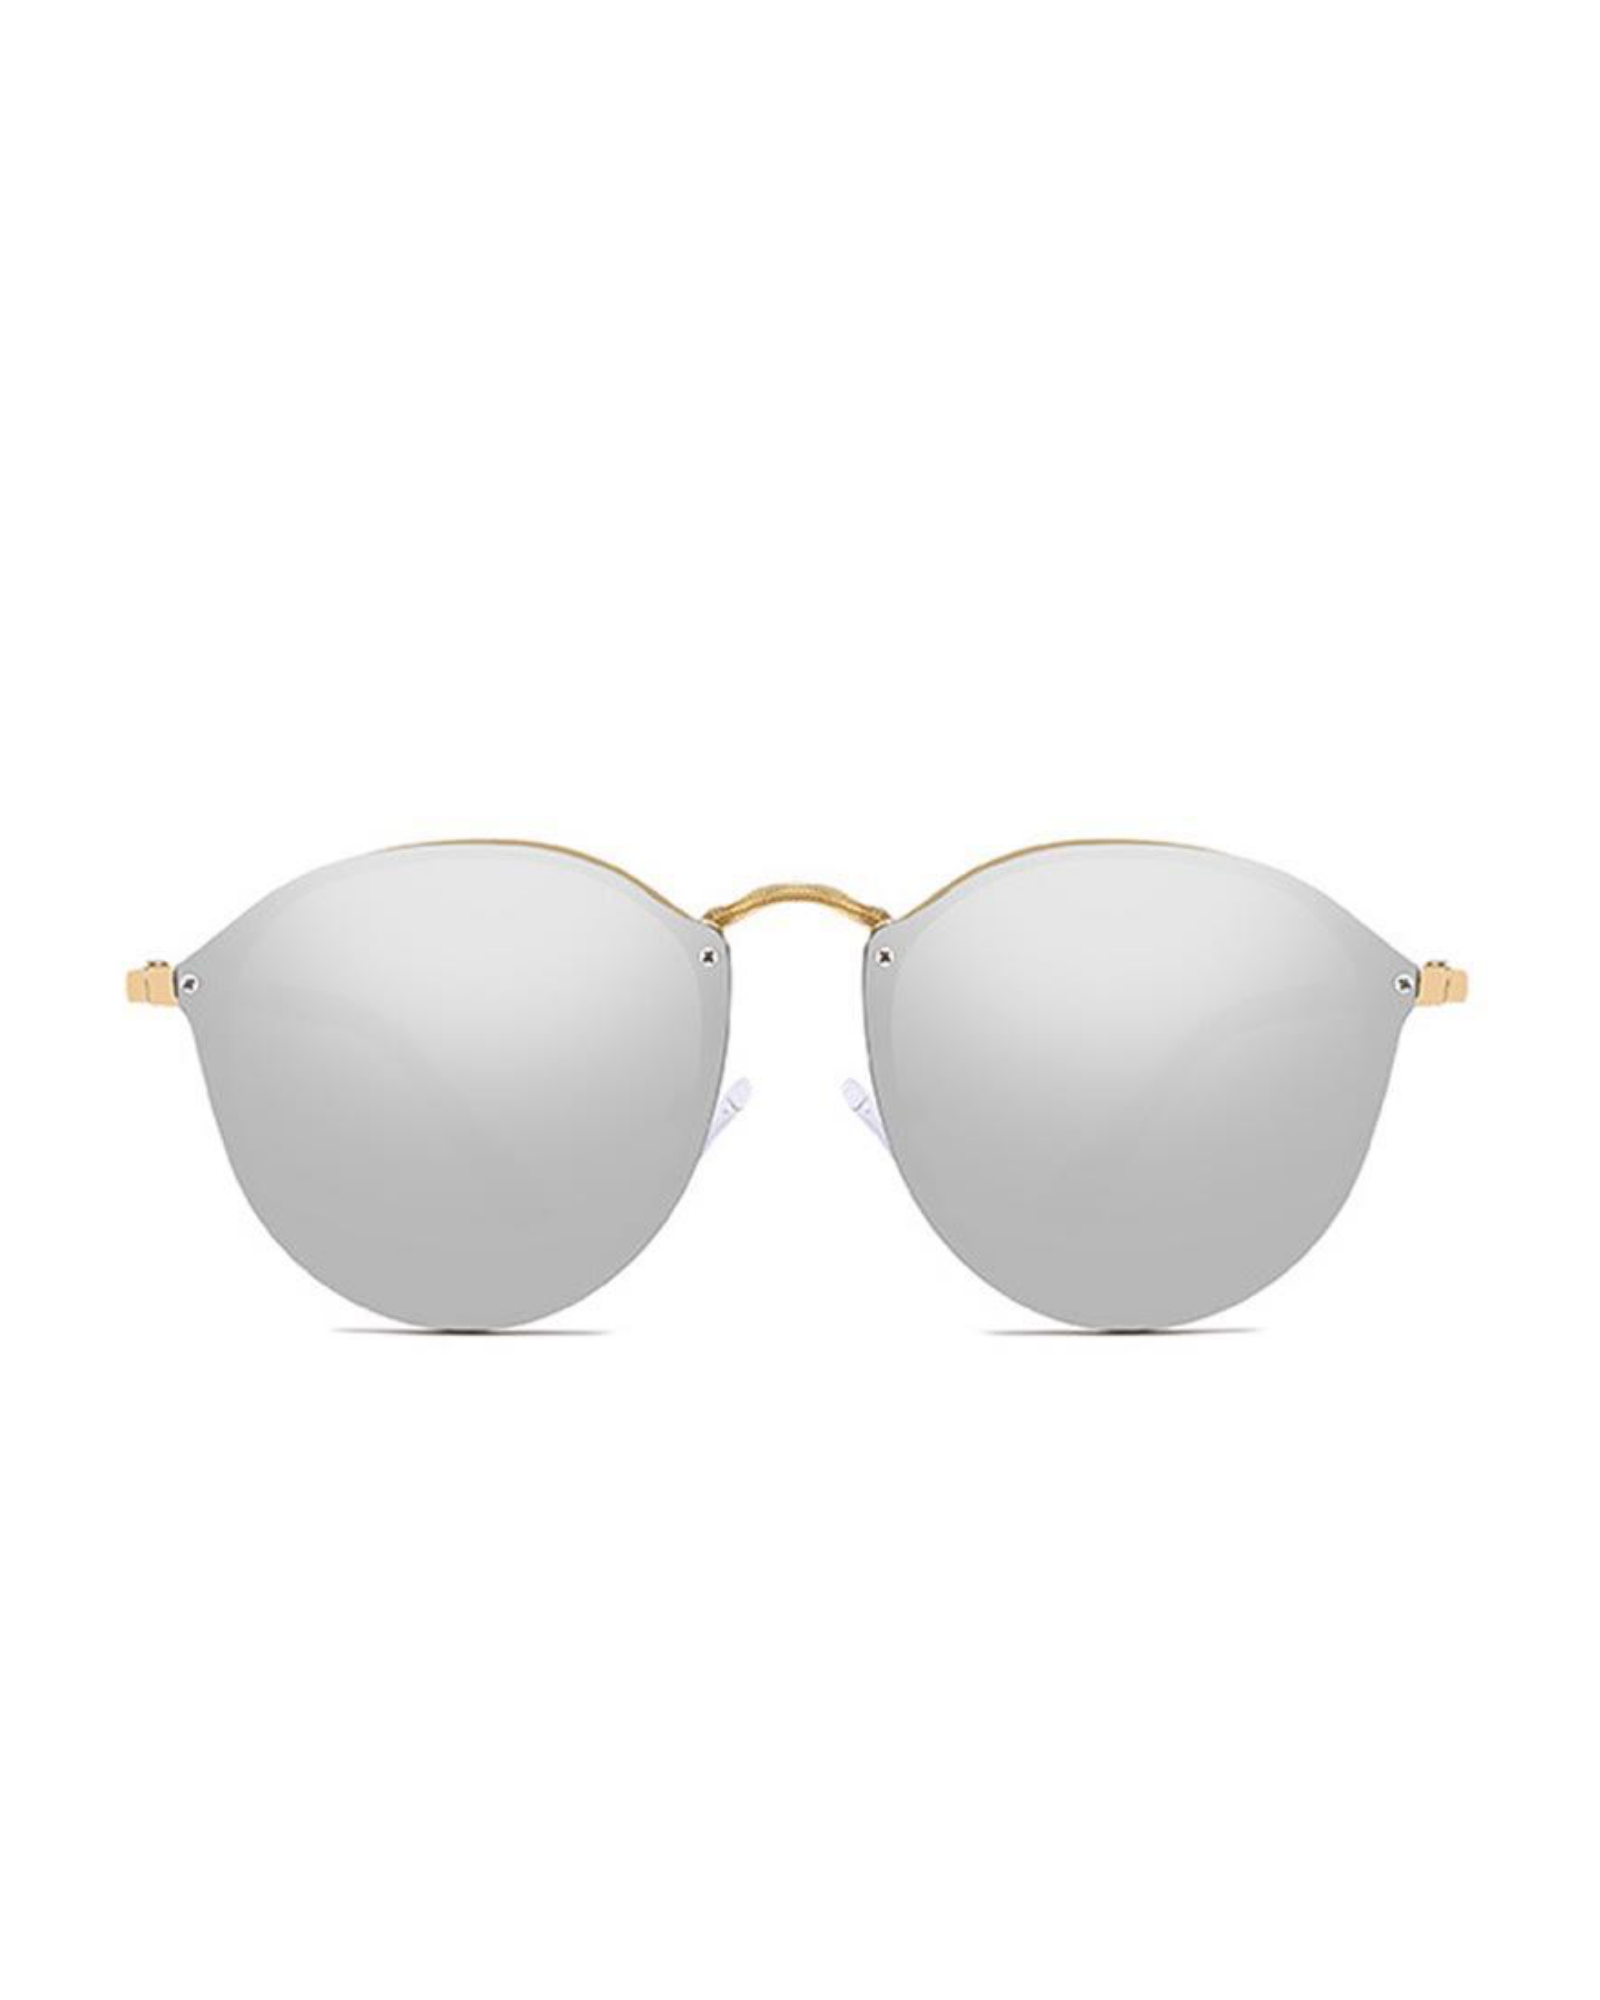 Hayden Sunglasses In Silver/Gold - The Details Boutique